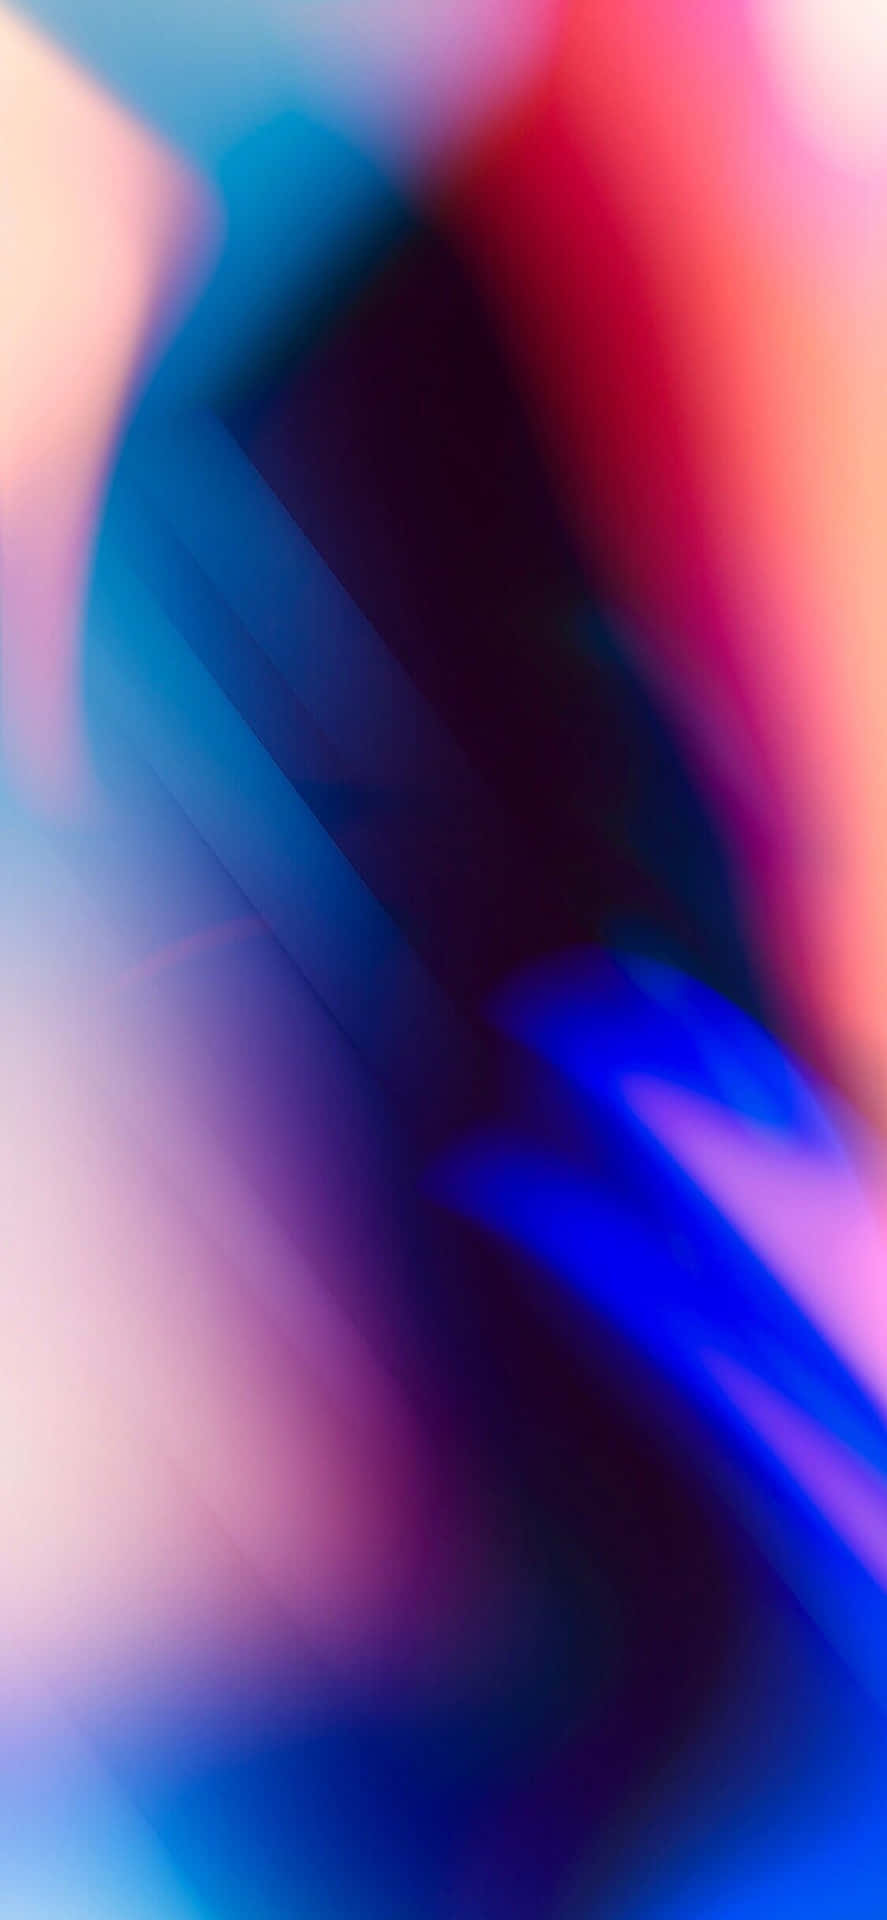 "Let Your Creativity Soar with This Cool Blue Abstract Iphone Wallpaper" Wallpaper